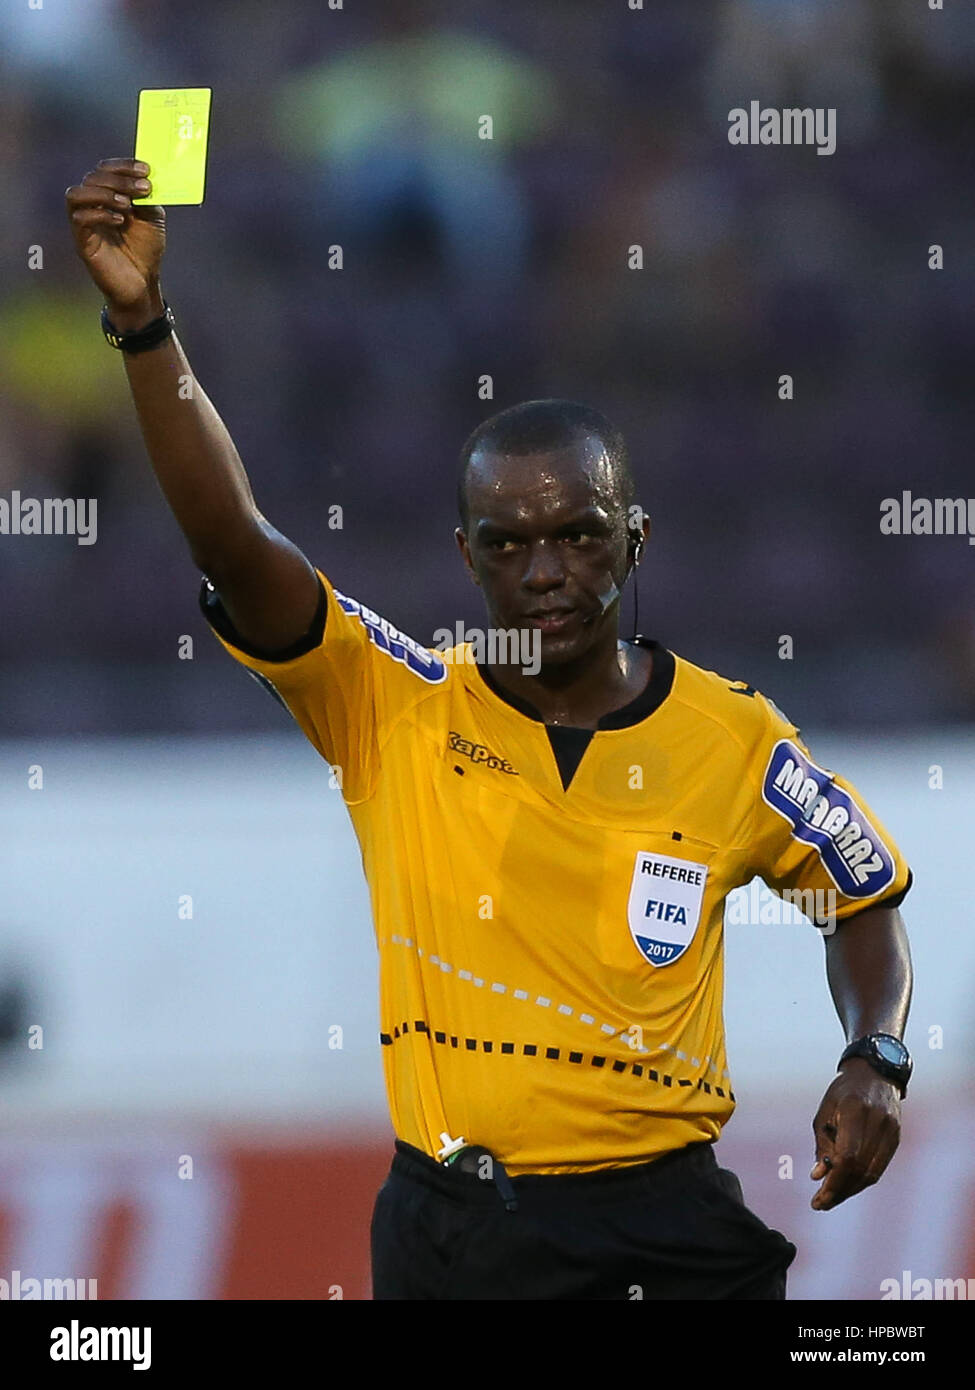 Araraquara, Brazil. 19th Feb, 2017. The referee Luiz Flavio de Oliveira, the match between the teams of SE Palmeiras and Linense CA during match valid for the fourth round of the Championship, A1 Series, in the Source Arena. Credit: Cesar Greco/FotoArena/Alamy Live News Stock Photo